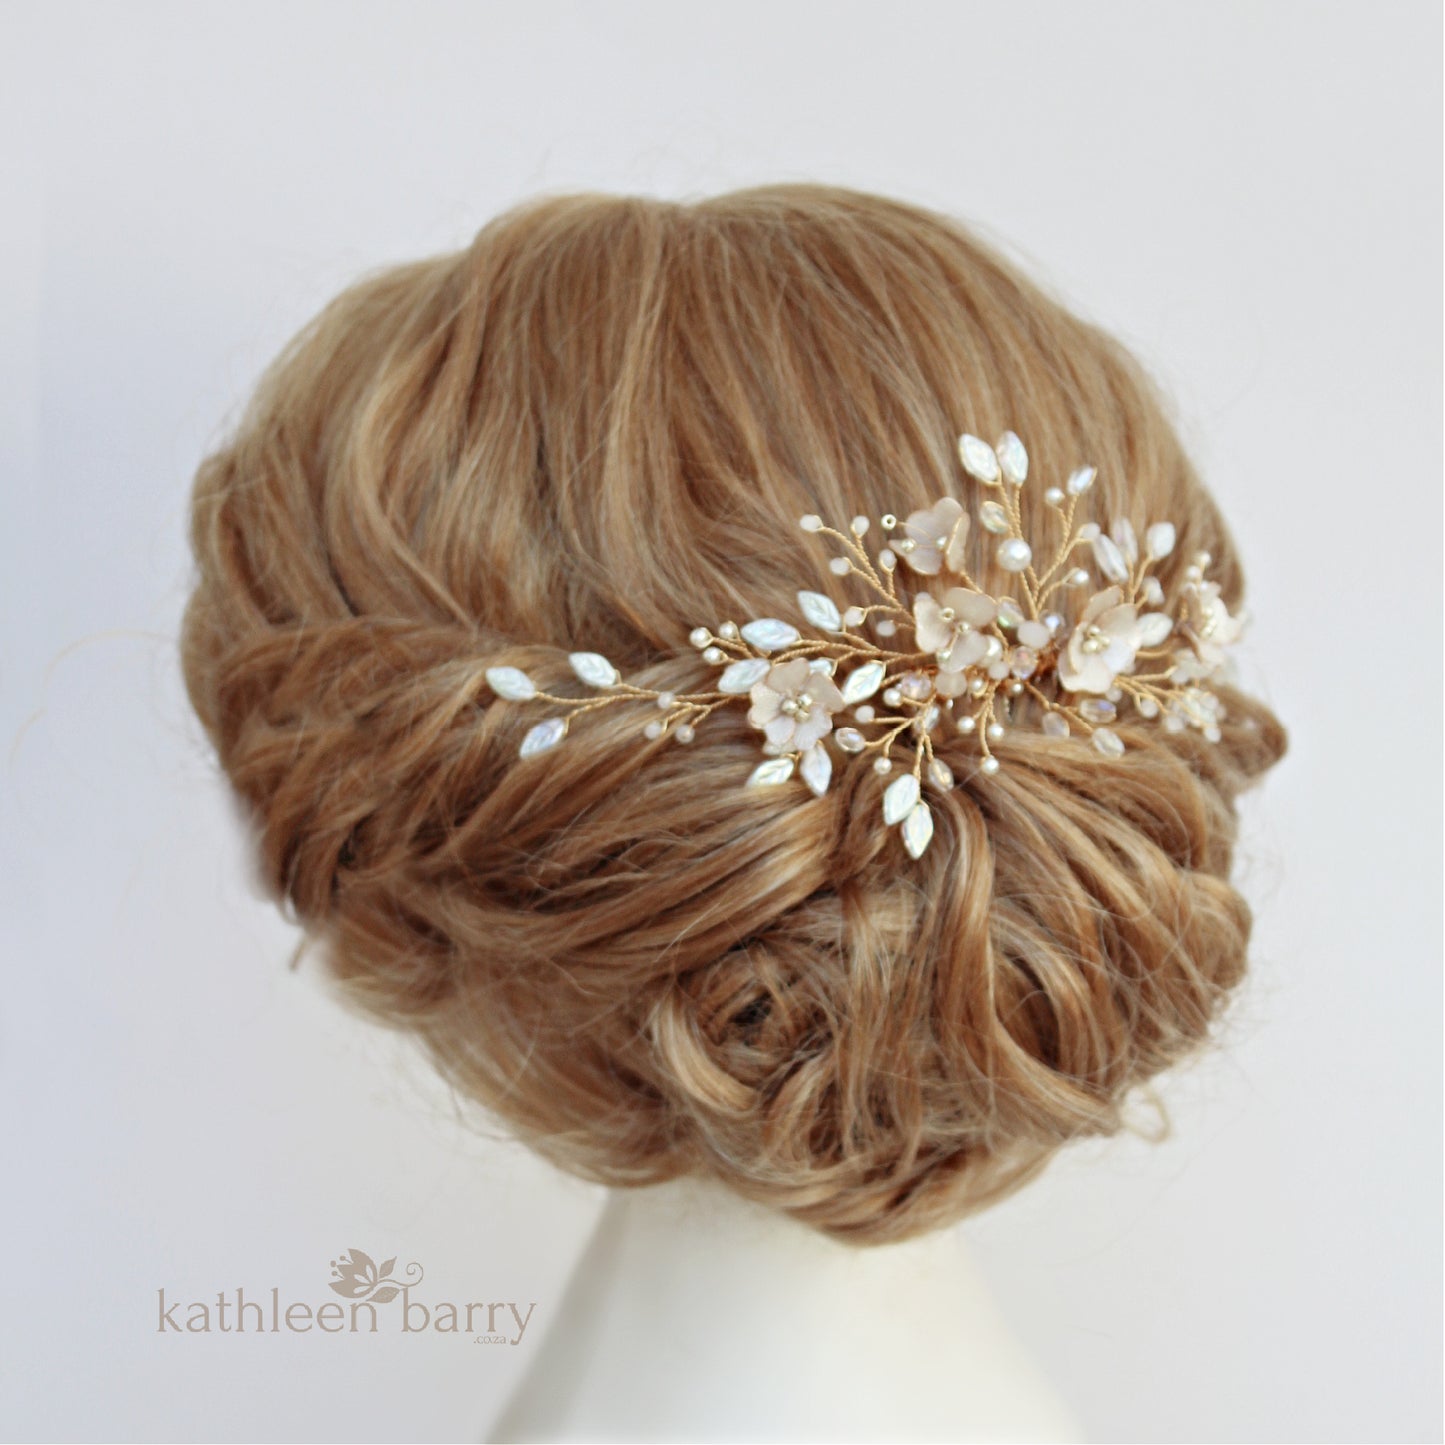 Danielle - Statement floral and pearl hairpiece -  color options available